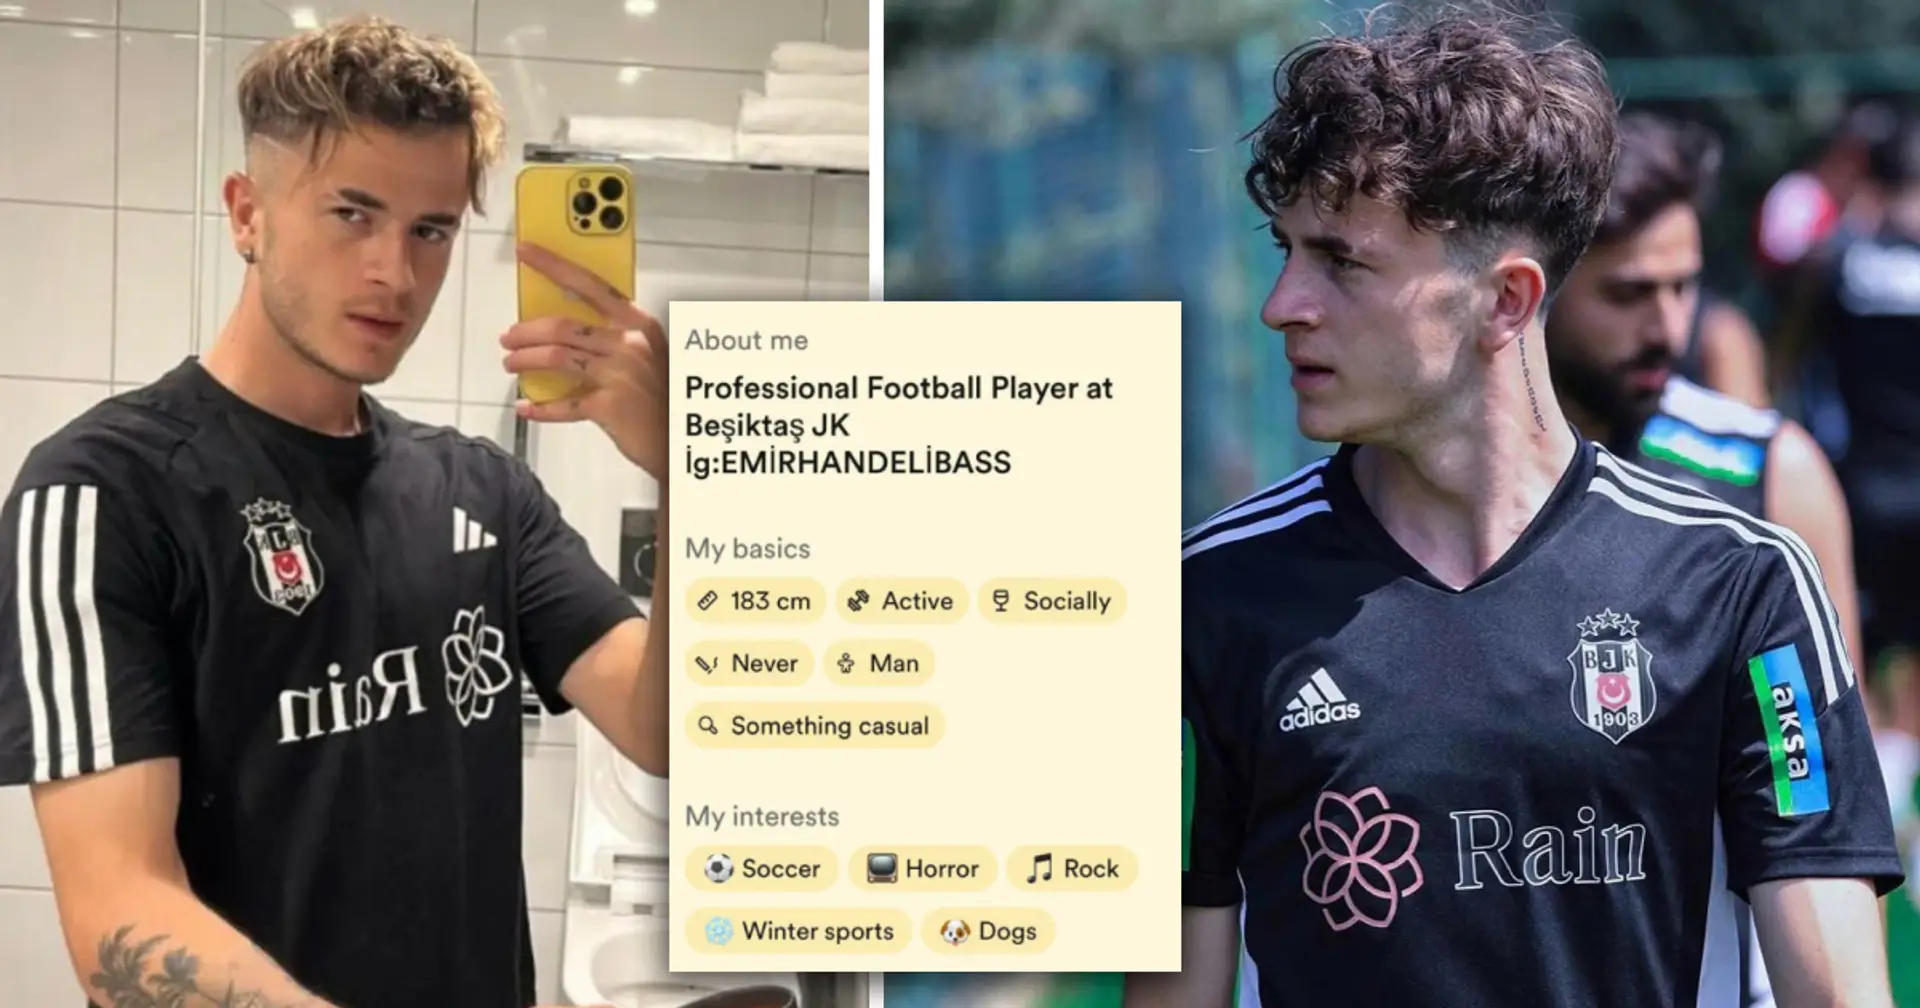 Besiktas ends midfielder's contract after dating profile goes viral as player brands account 'fake'